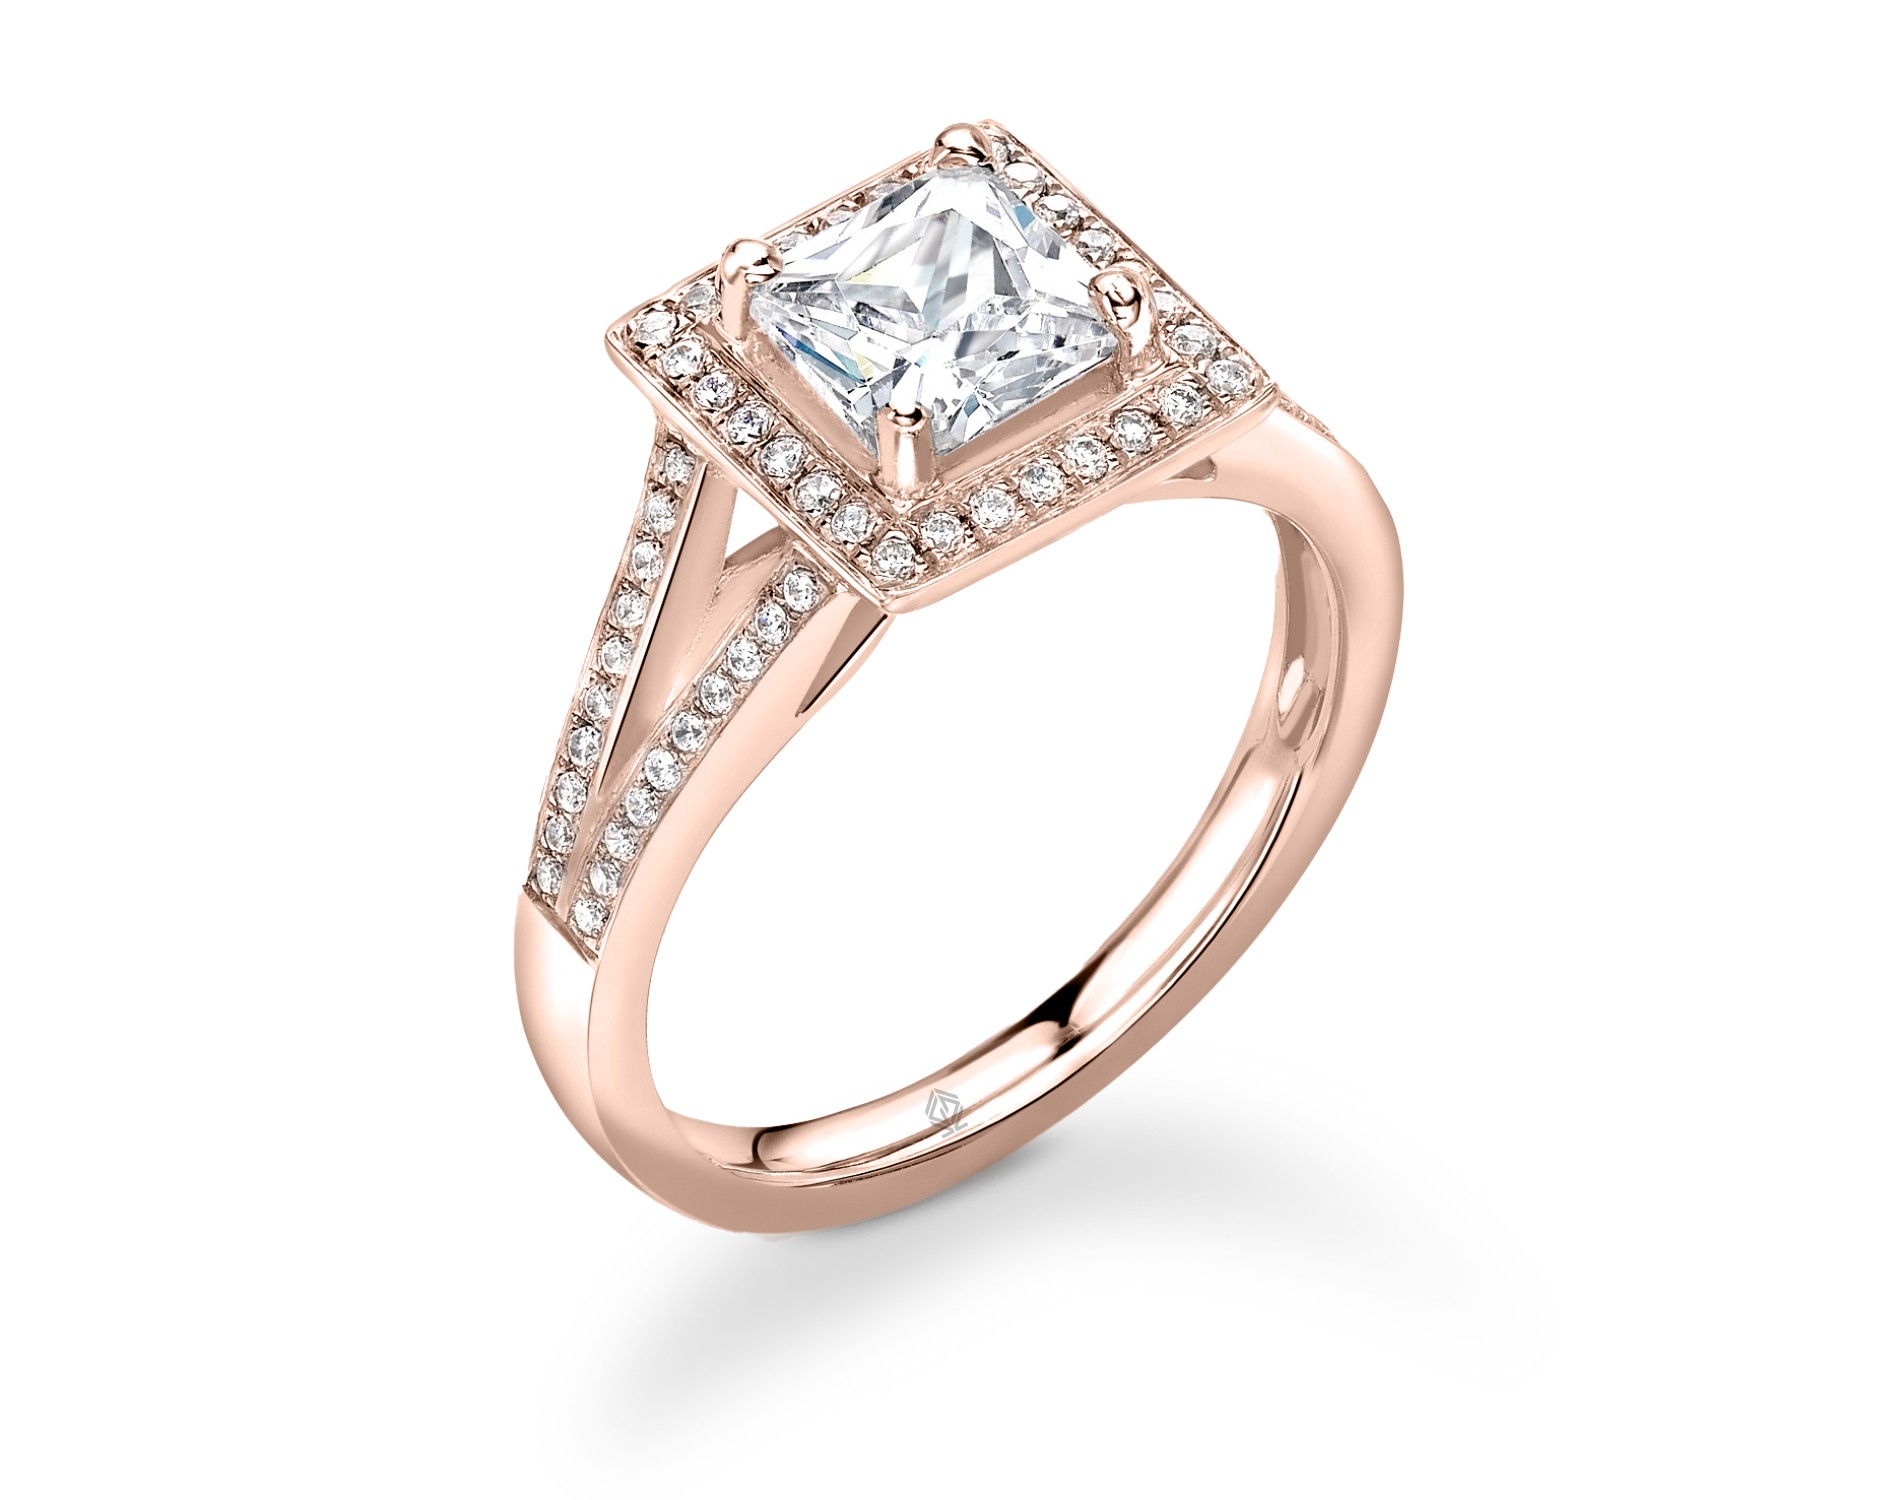 18K ROSE GOLD HALO PRINCESS CUT DIAMOND ENGAGEMENT RING WITH SIDE STONES CHANNEL SET